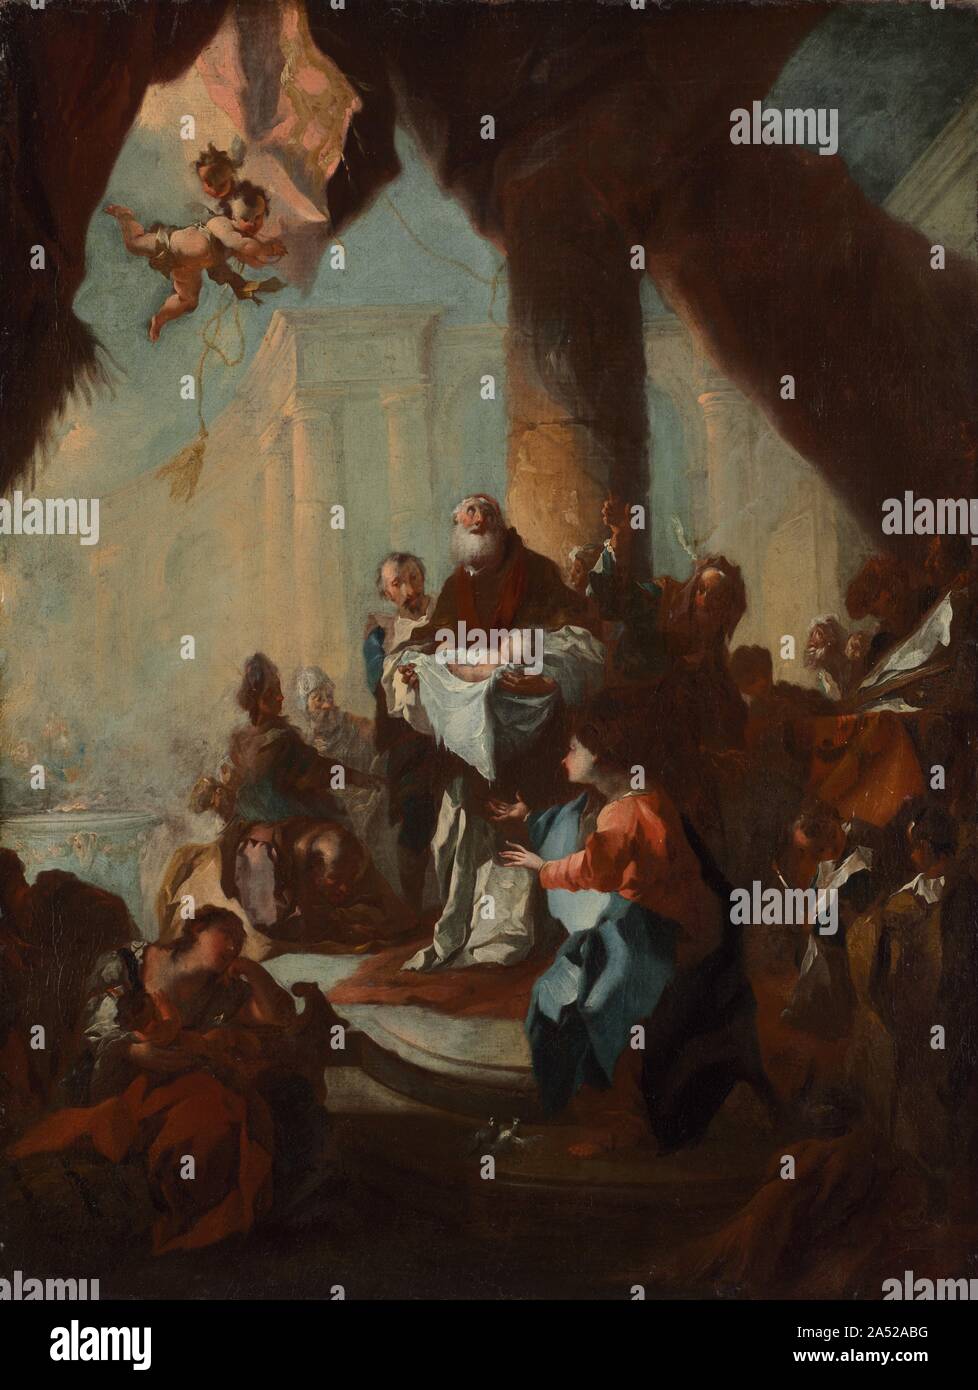 Study for &quot;The Presentation of Christ in the Temple&quot; (for Saint Ulrich, Vienna), c. 1750. This loosely painted sketch is the preliminary design for an altarpiece in the Church of Saint Ulrich, Vienna. Mary and Joseph have brought the infant Jesus to the temple to be inducted into the Jewish faith; the aged priest Simeon cradles the infant in his arms, turning his gaze to heaven as he realizes that he is holding the Son of God. Strong contrasts of light and shadow underscore the drama of the moment.   The frame is not original to this painting, but was made by an Austrian craftsman in Stock Photo